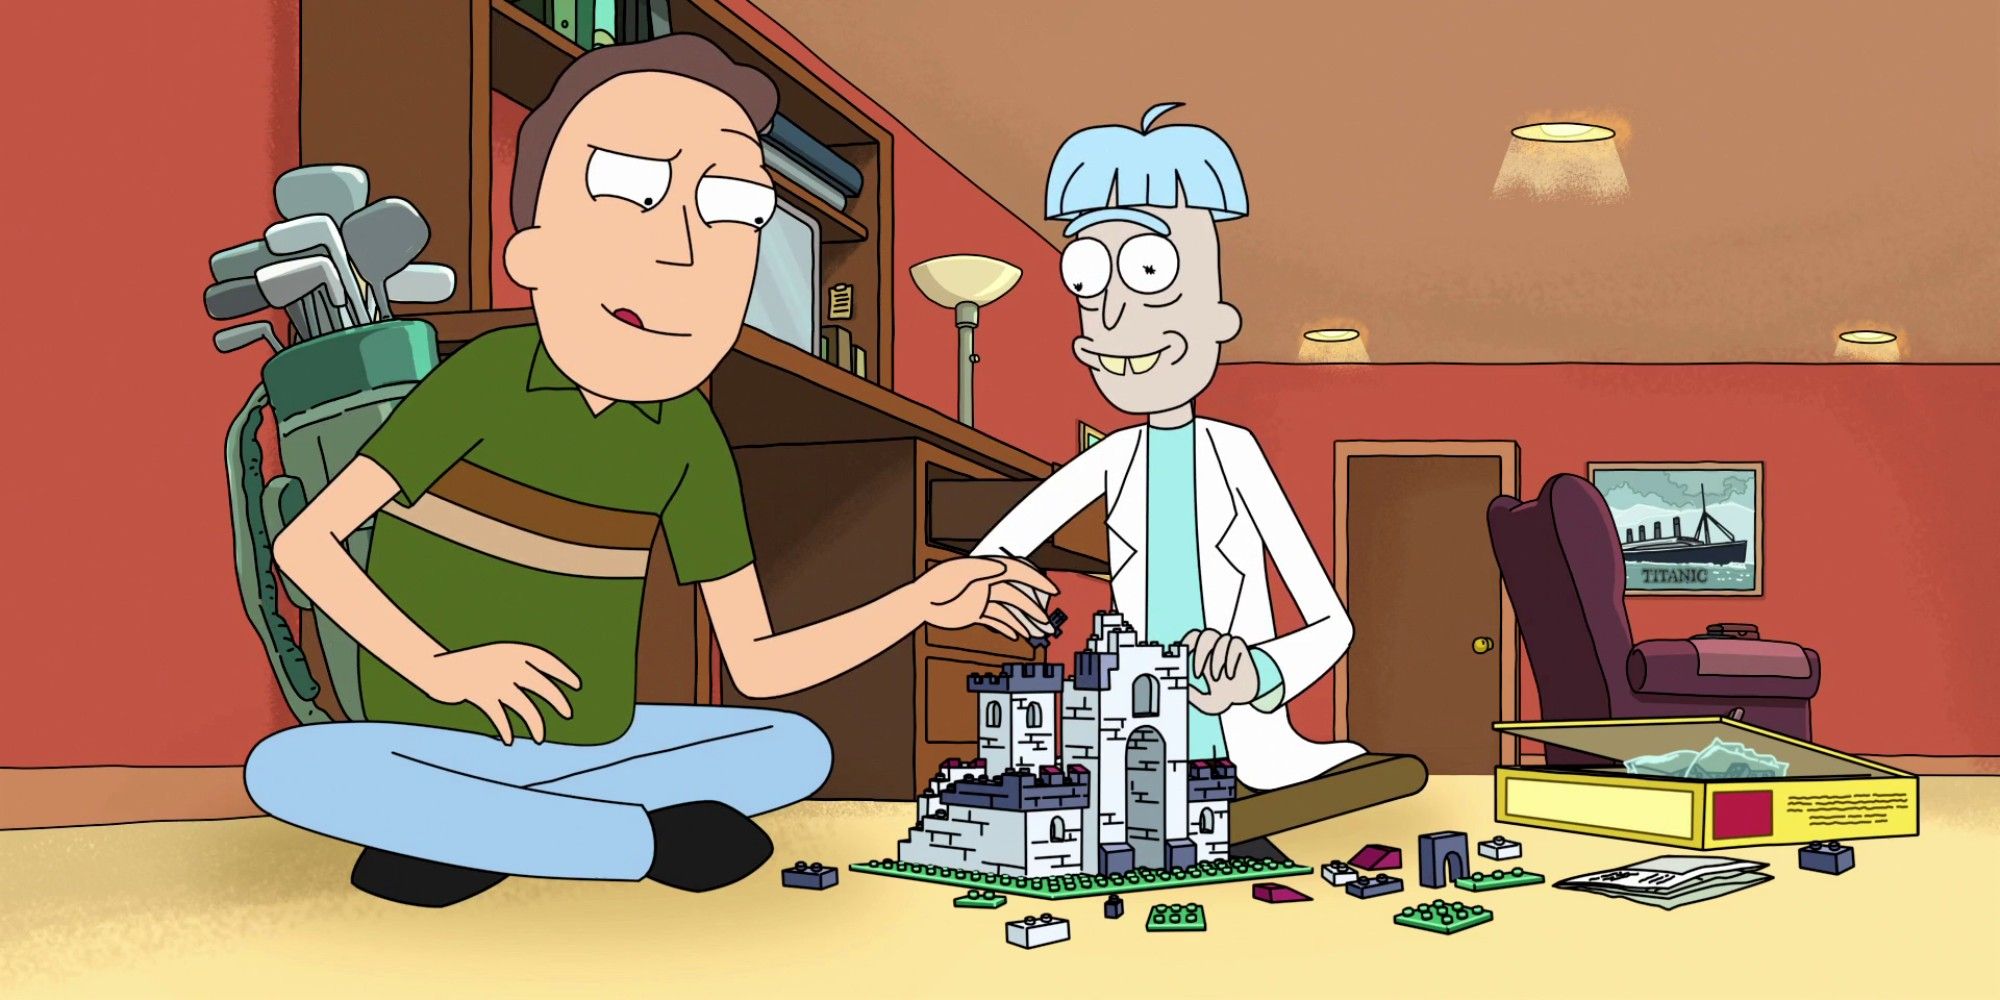 jerry and doofus rick in rick and morty